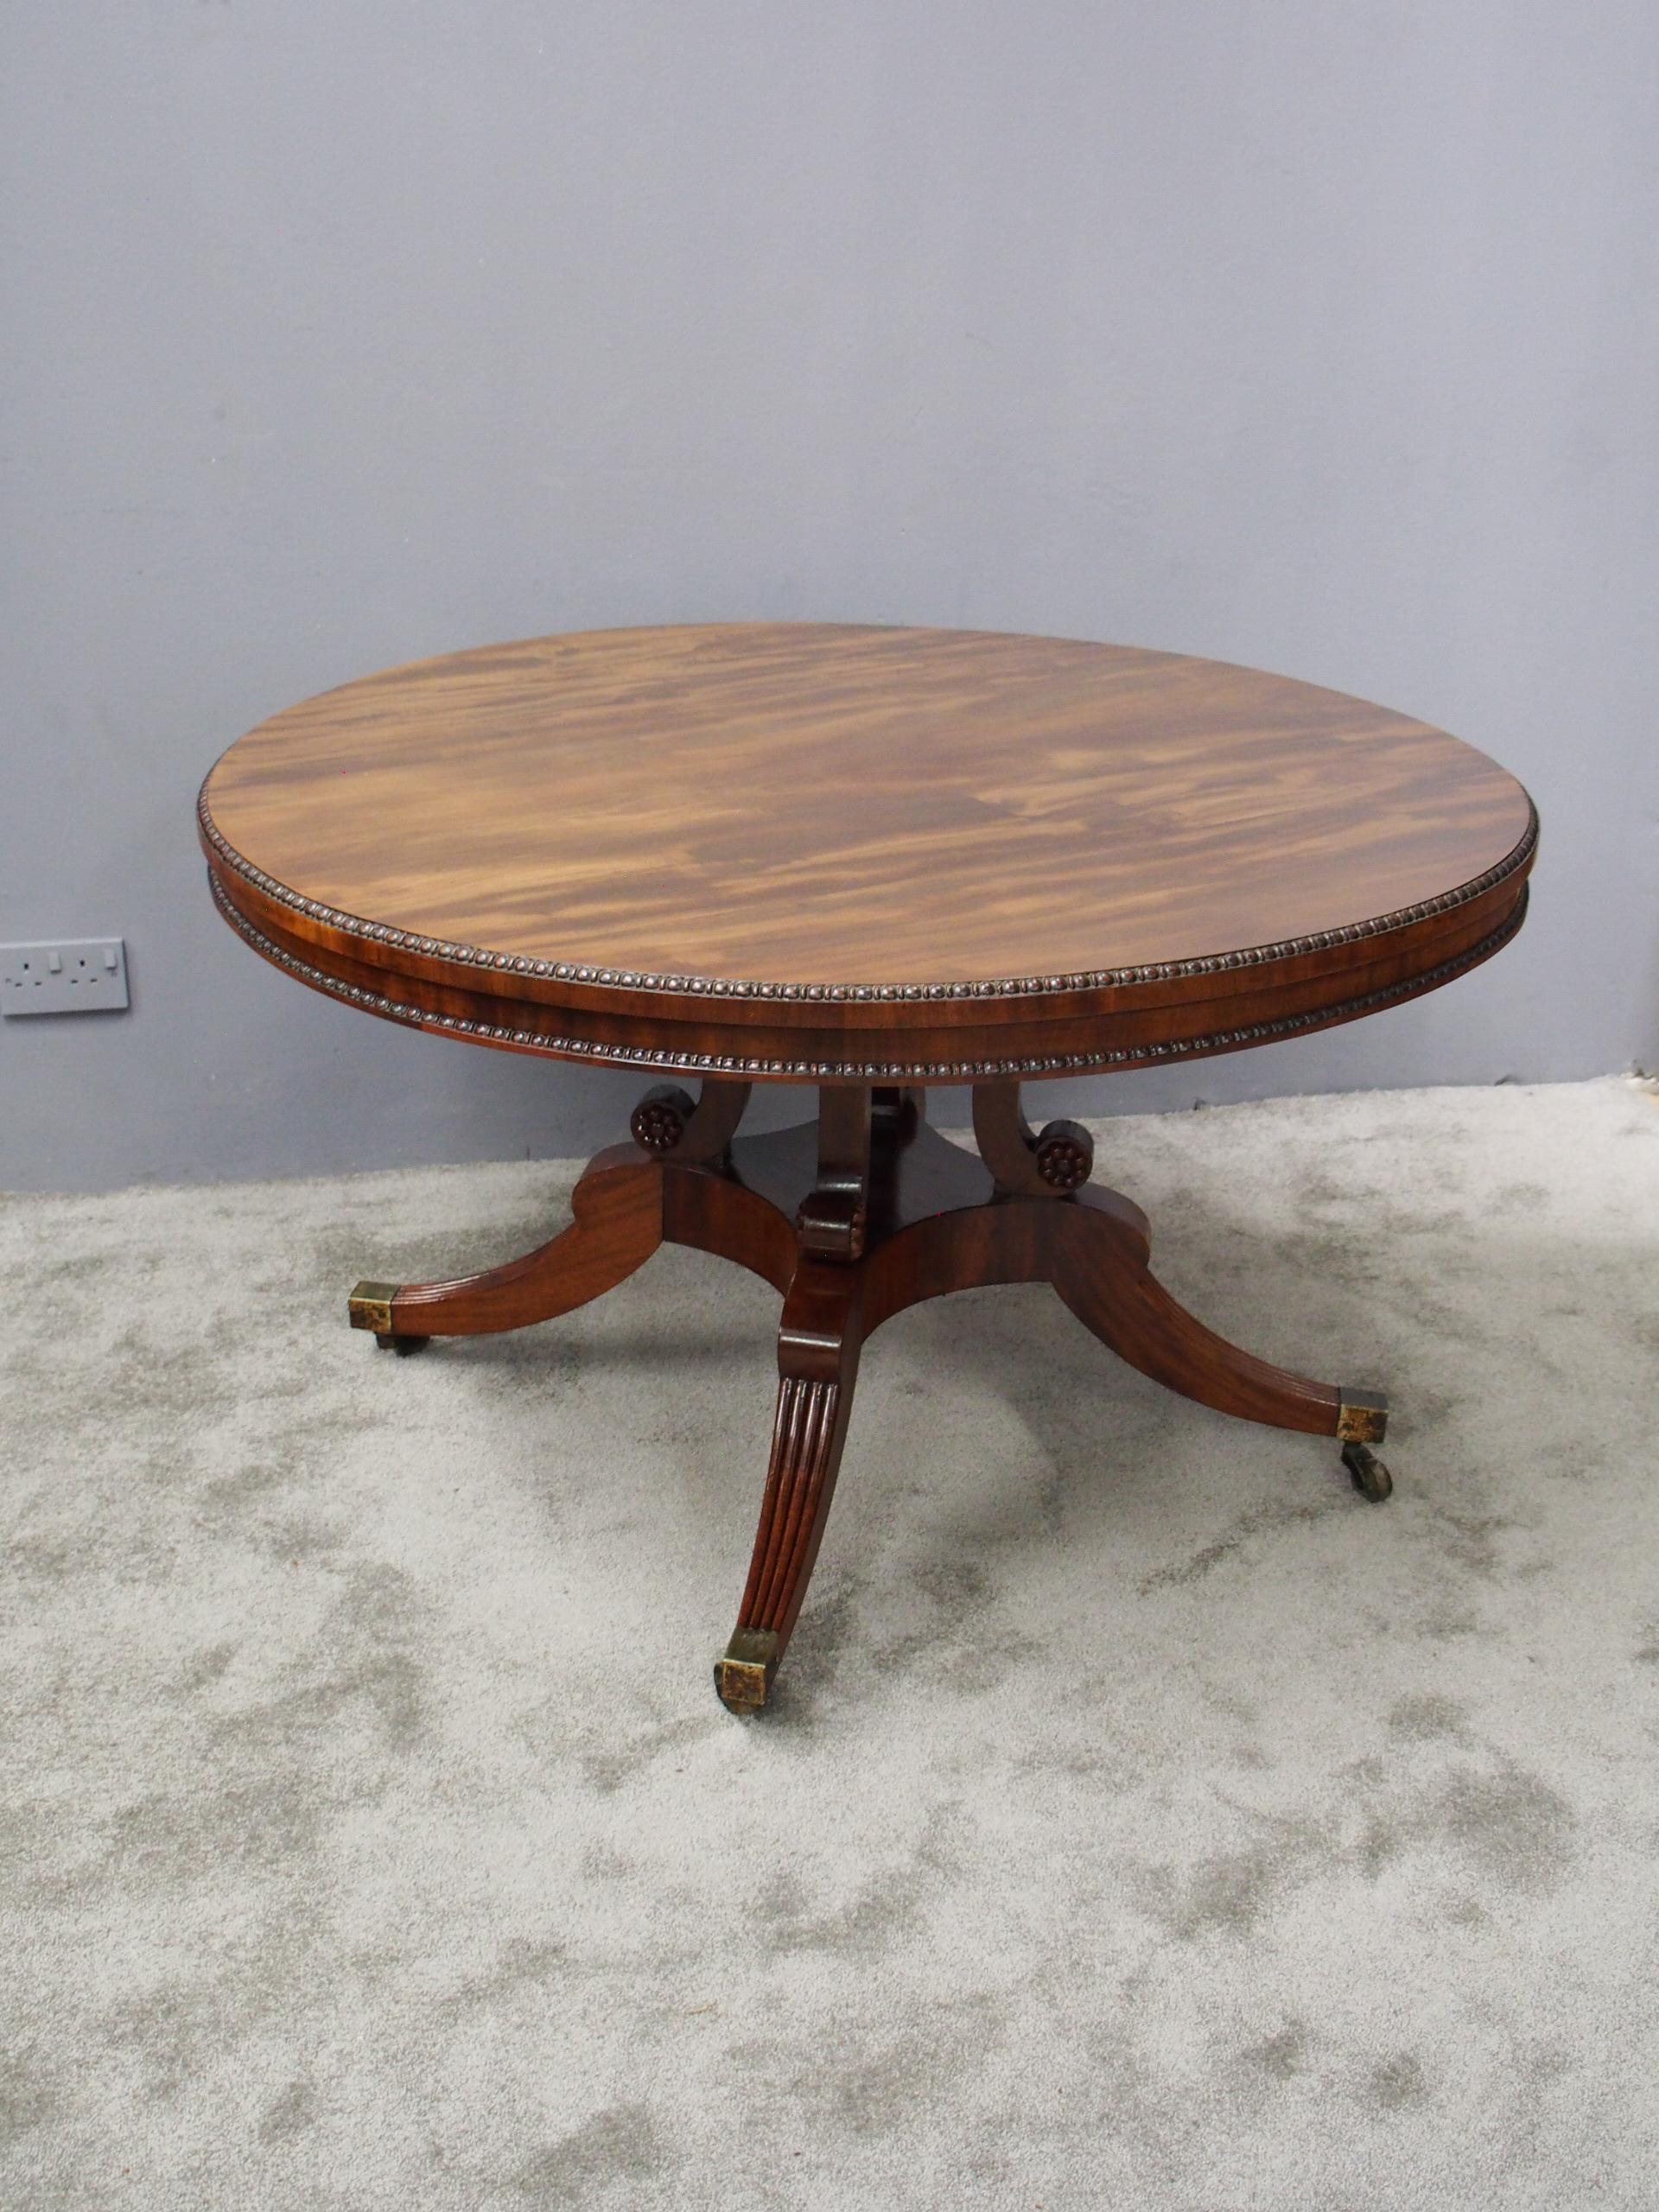 Regency William Trotter Style Mahogany Breakfast Table In Good Condition For Sale In Edinburgh, GB